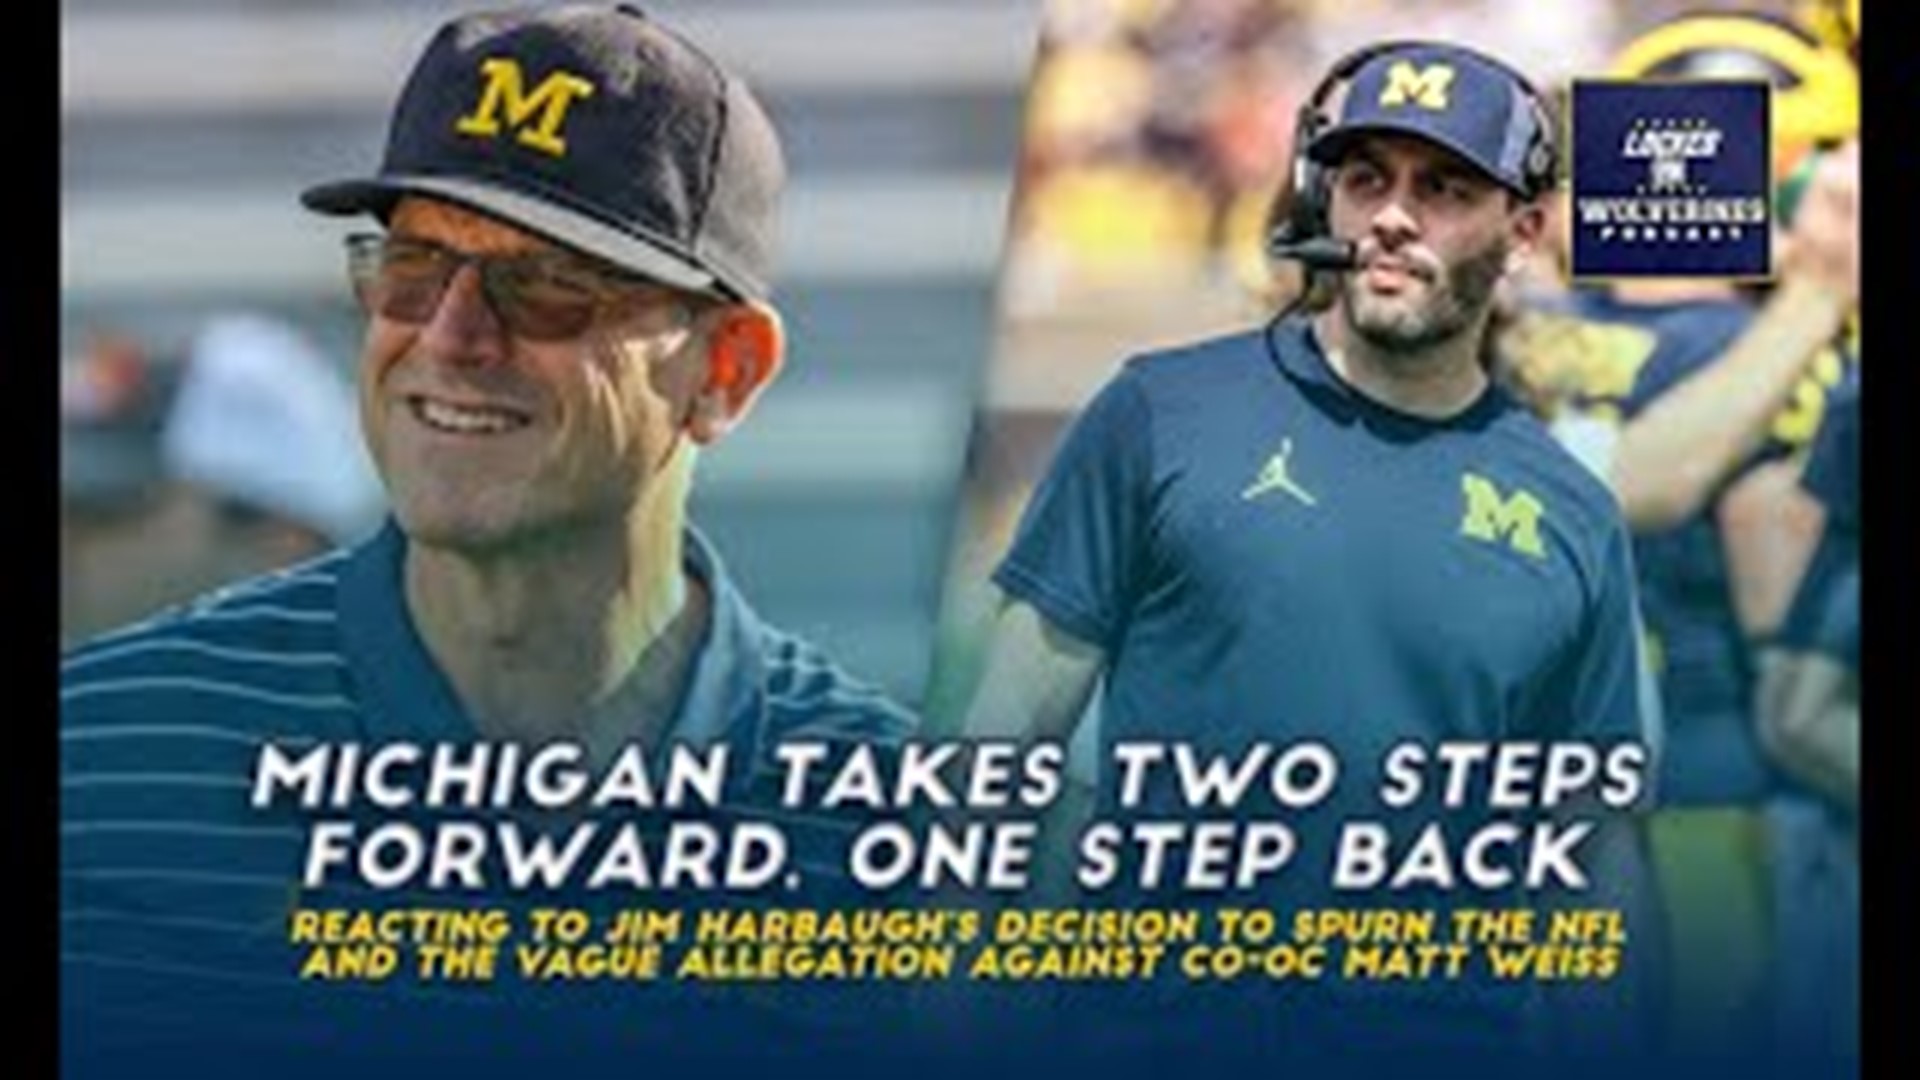 Jim Harbaugh is coming back, effectively ending flirtation with the NFL, and co-offensive coordinator Matt Weiss has been suspended for alleged computer crimes.